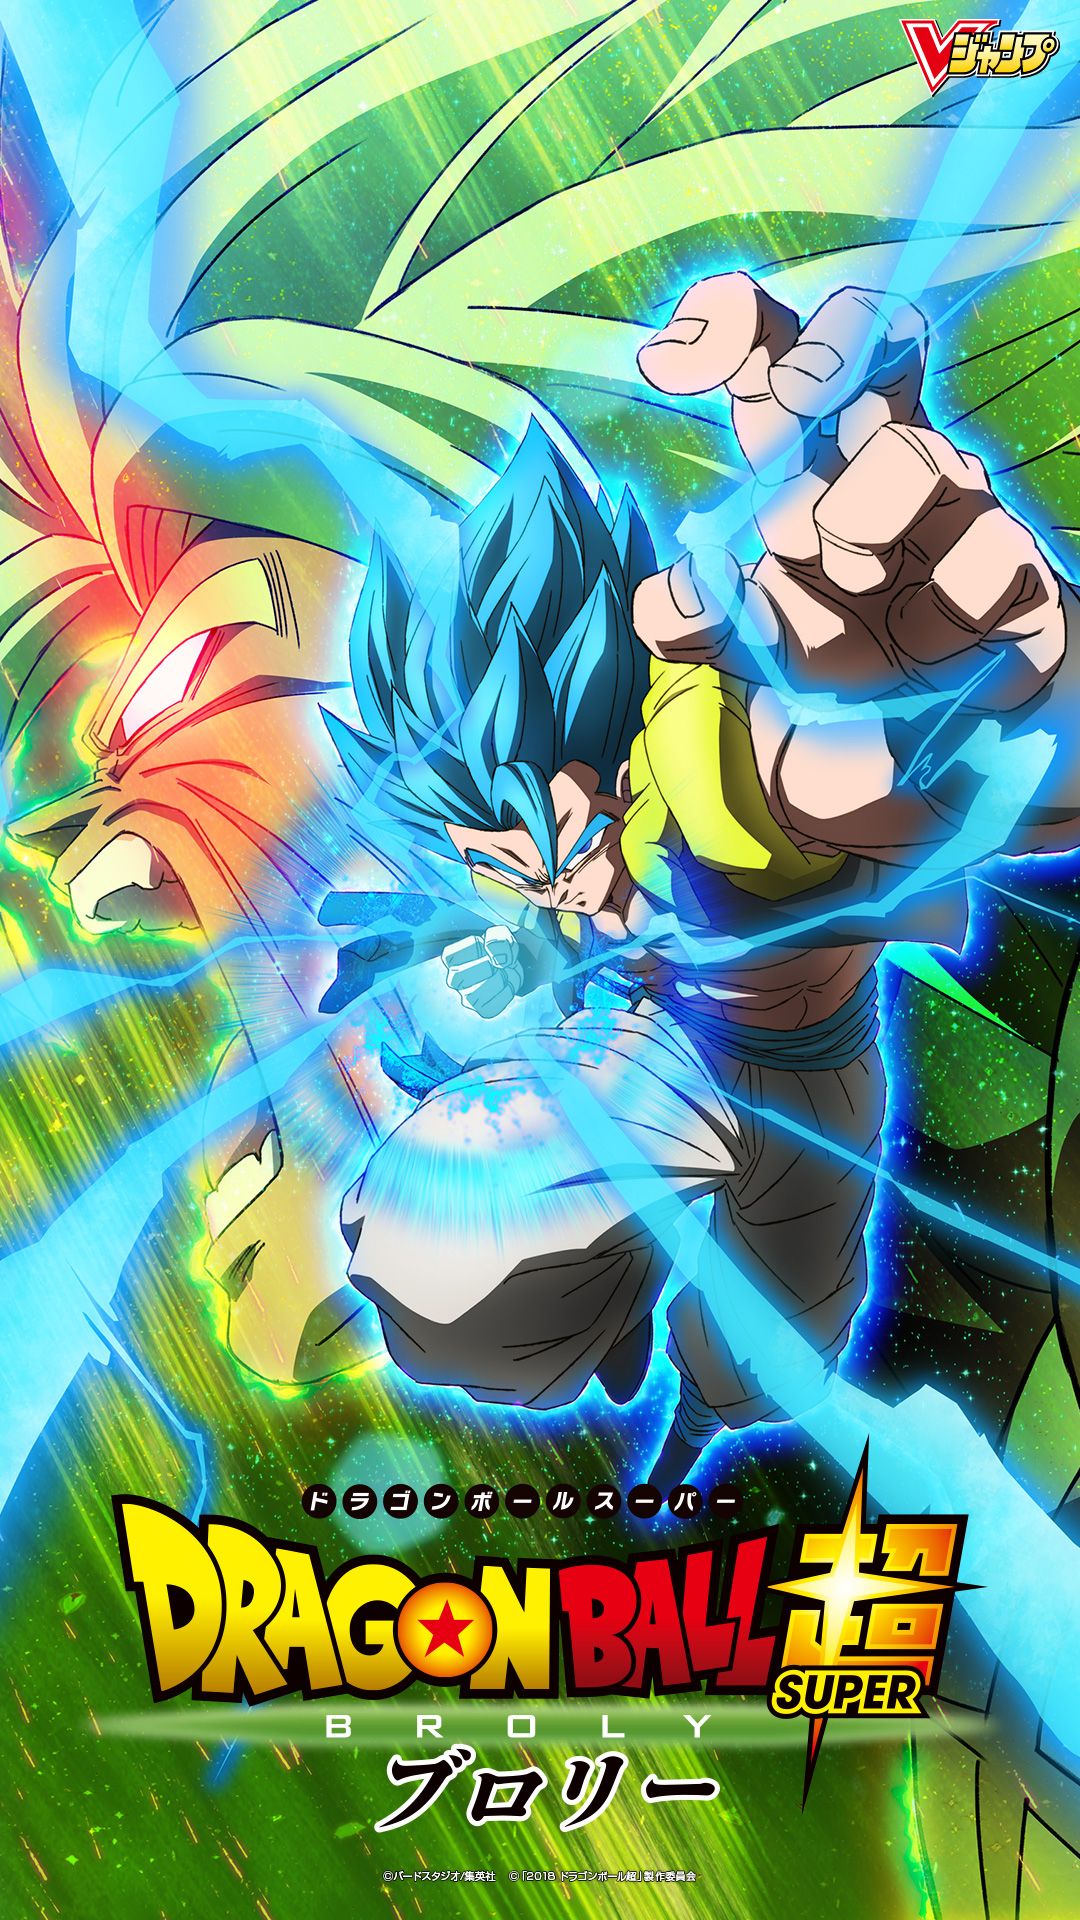 Featured image of post Dbs Broly Movie Poster : Check out our dbz broly movie selection for the very best in unique or custom, handmade pieces from our shops.